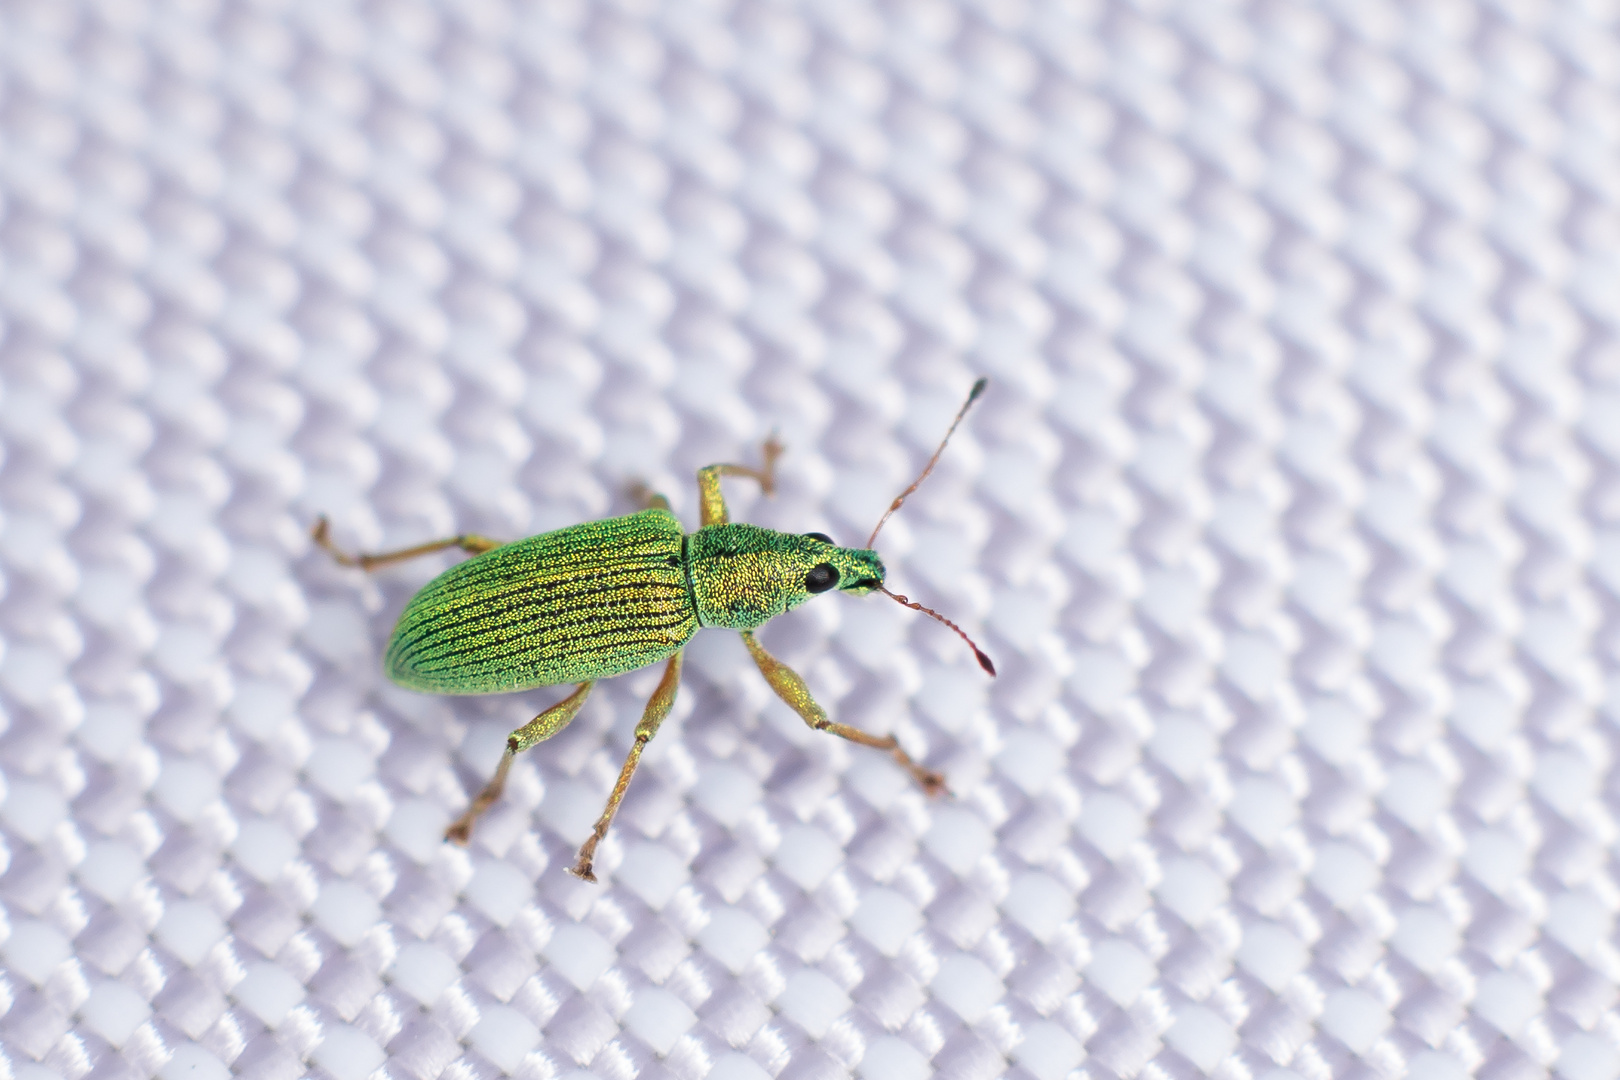 Just another small insect on your fabric